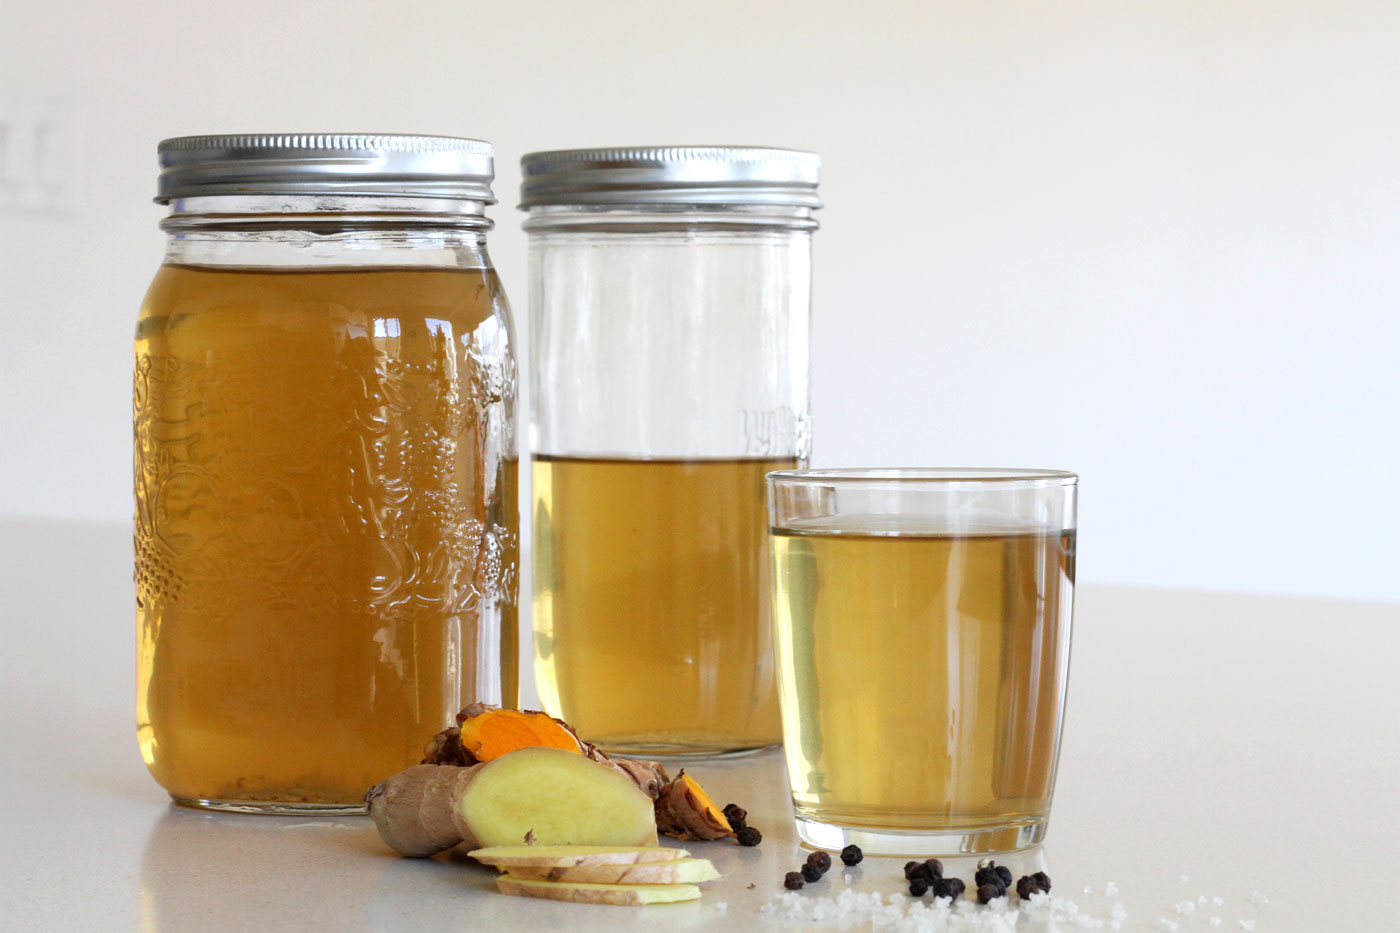 Vegan Gut Microbiome Broth Recipe helps you rebuild your gut and health system